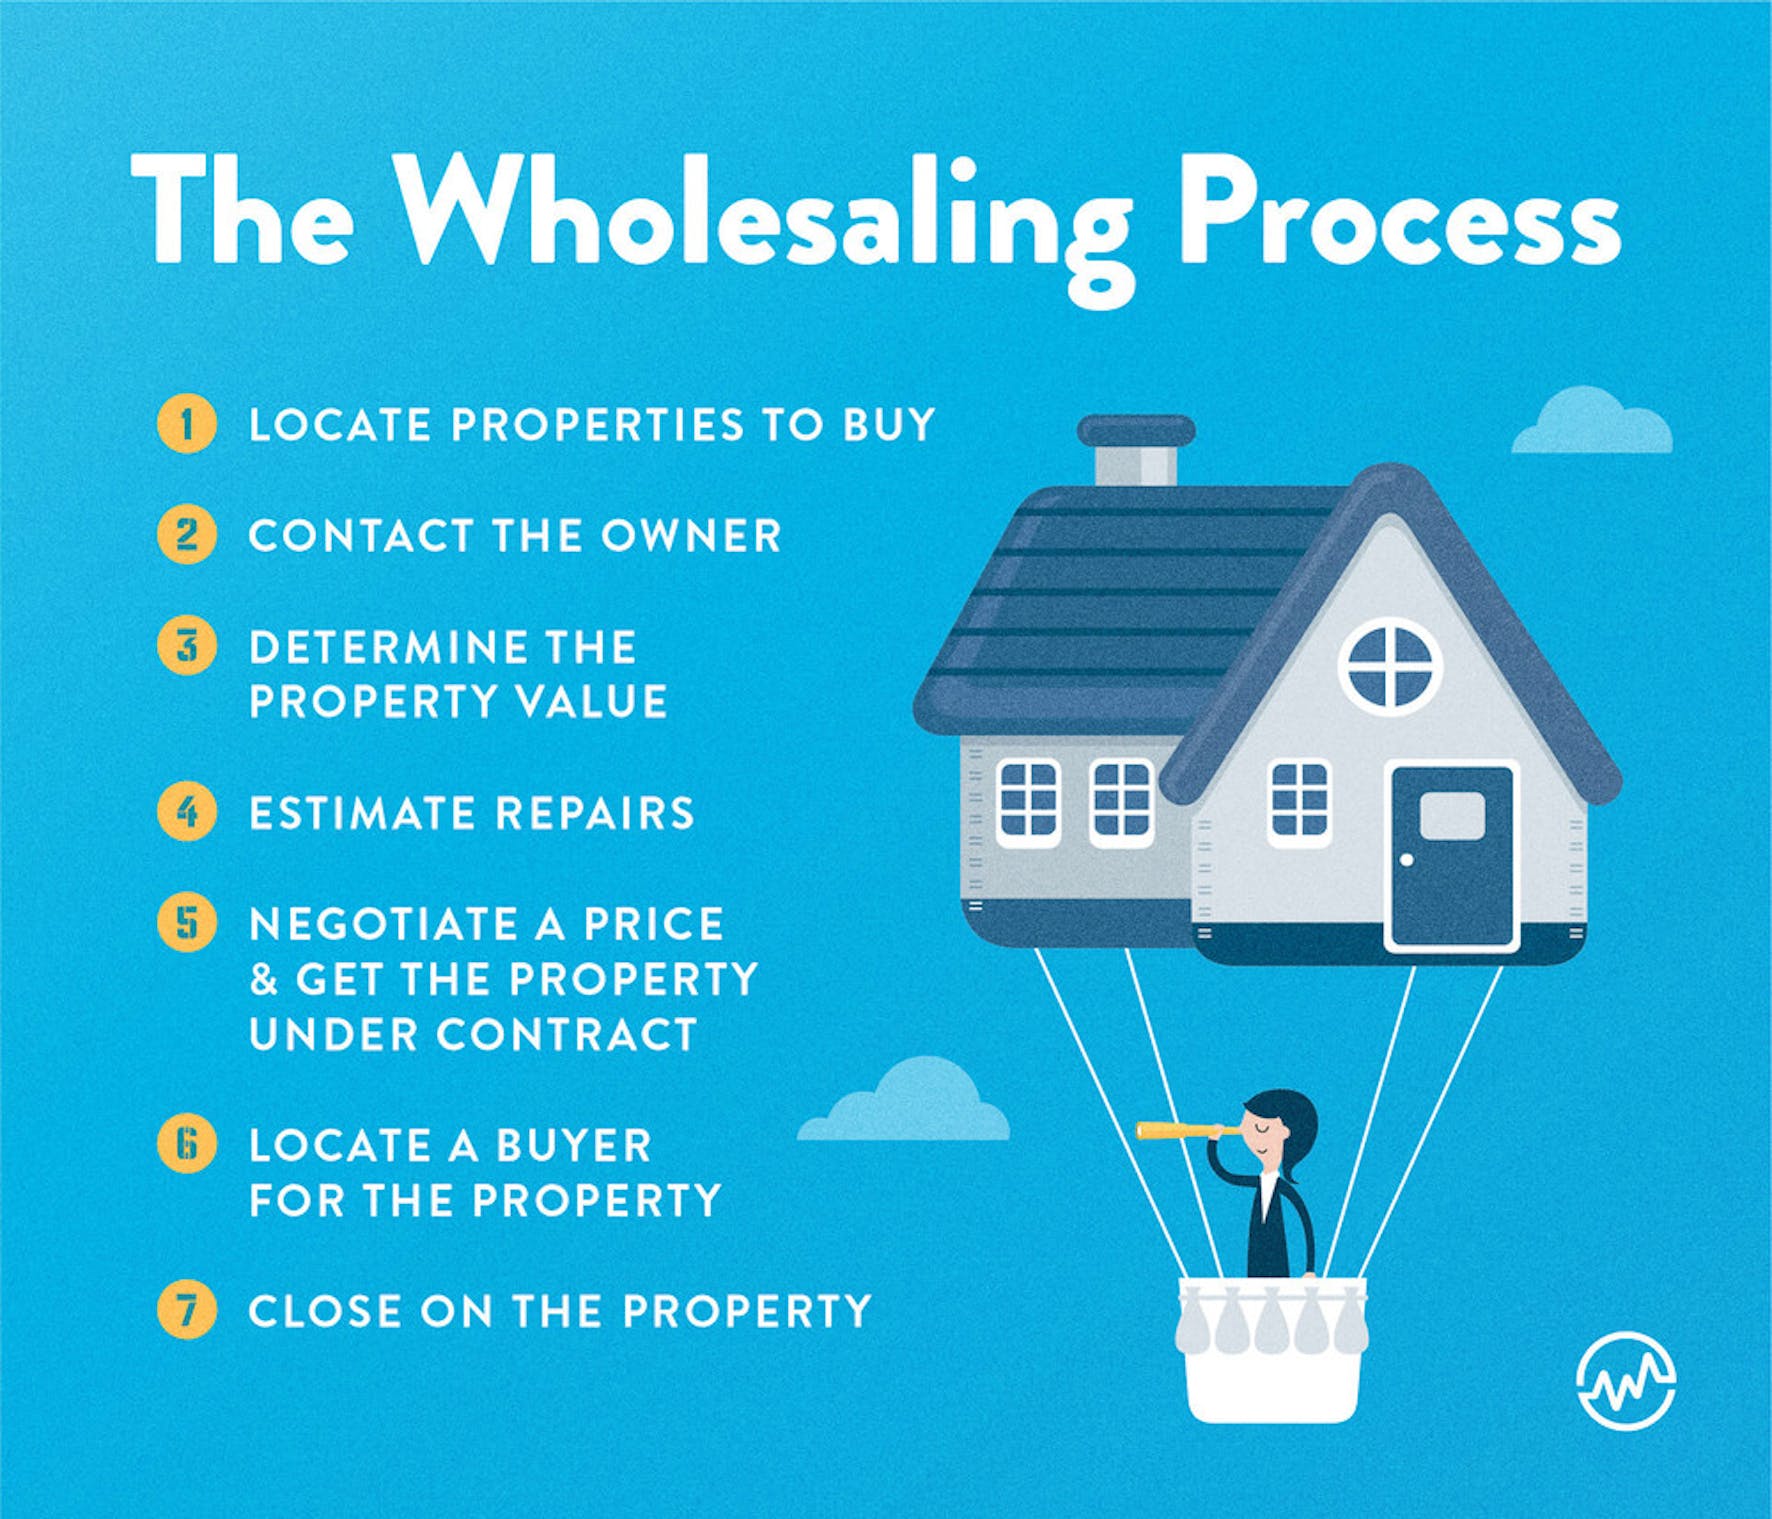 How to find a buyer for wholesale real estate